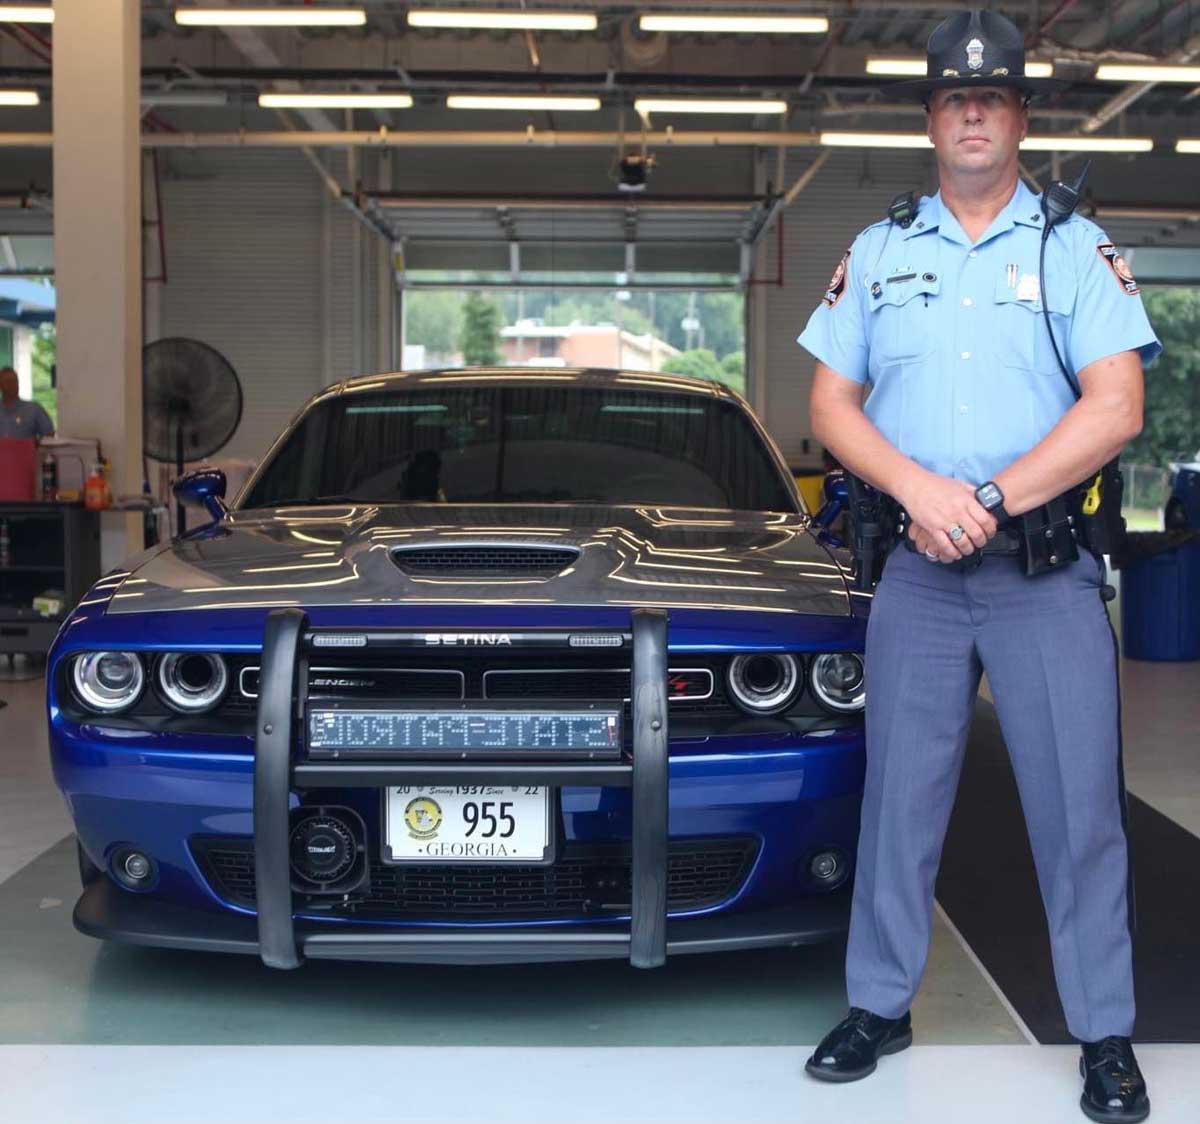 Georgia state police officer